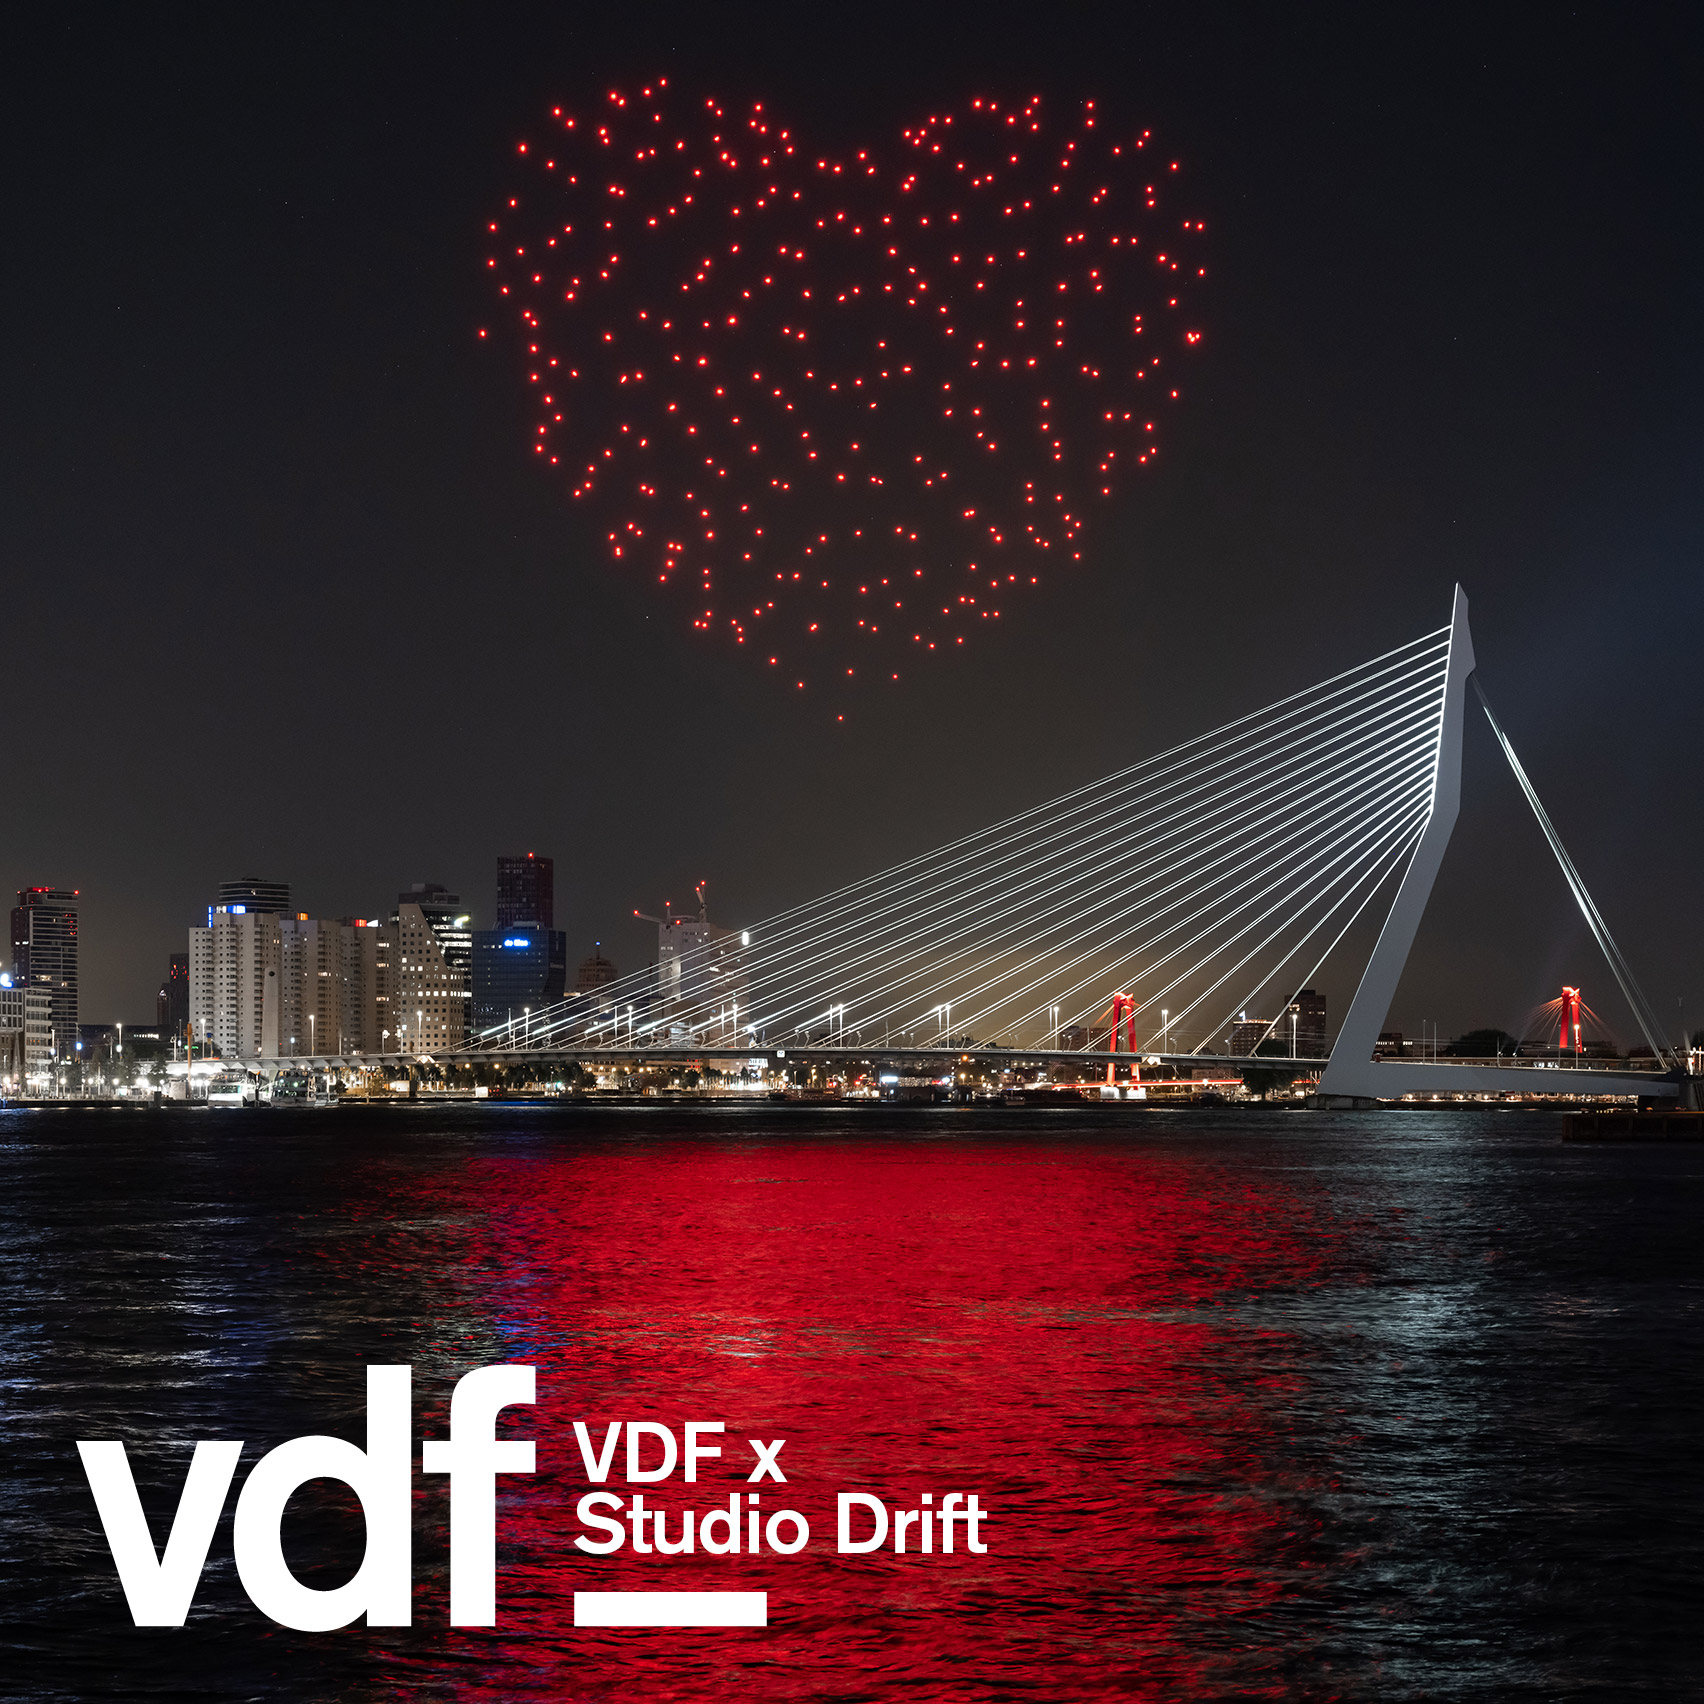 Studio Drift uses drones to create beating heart above Rotterdam in tribute to healthcare workers